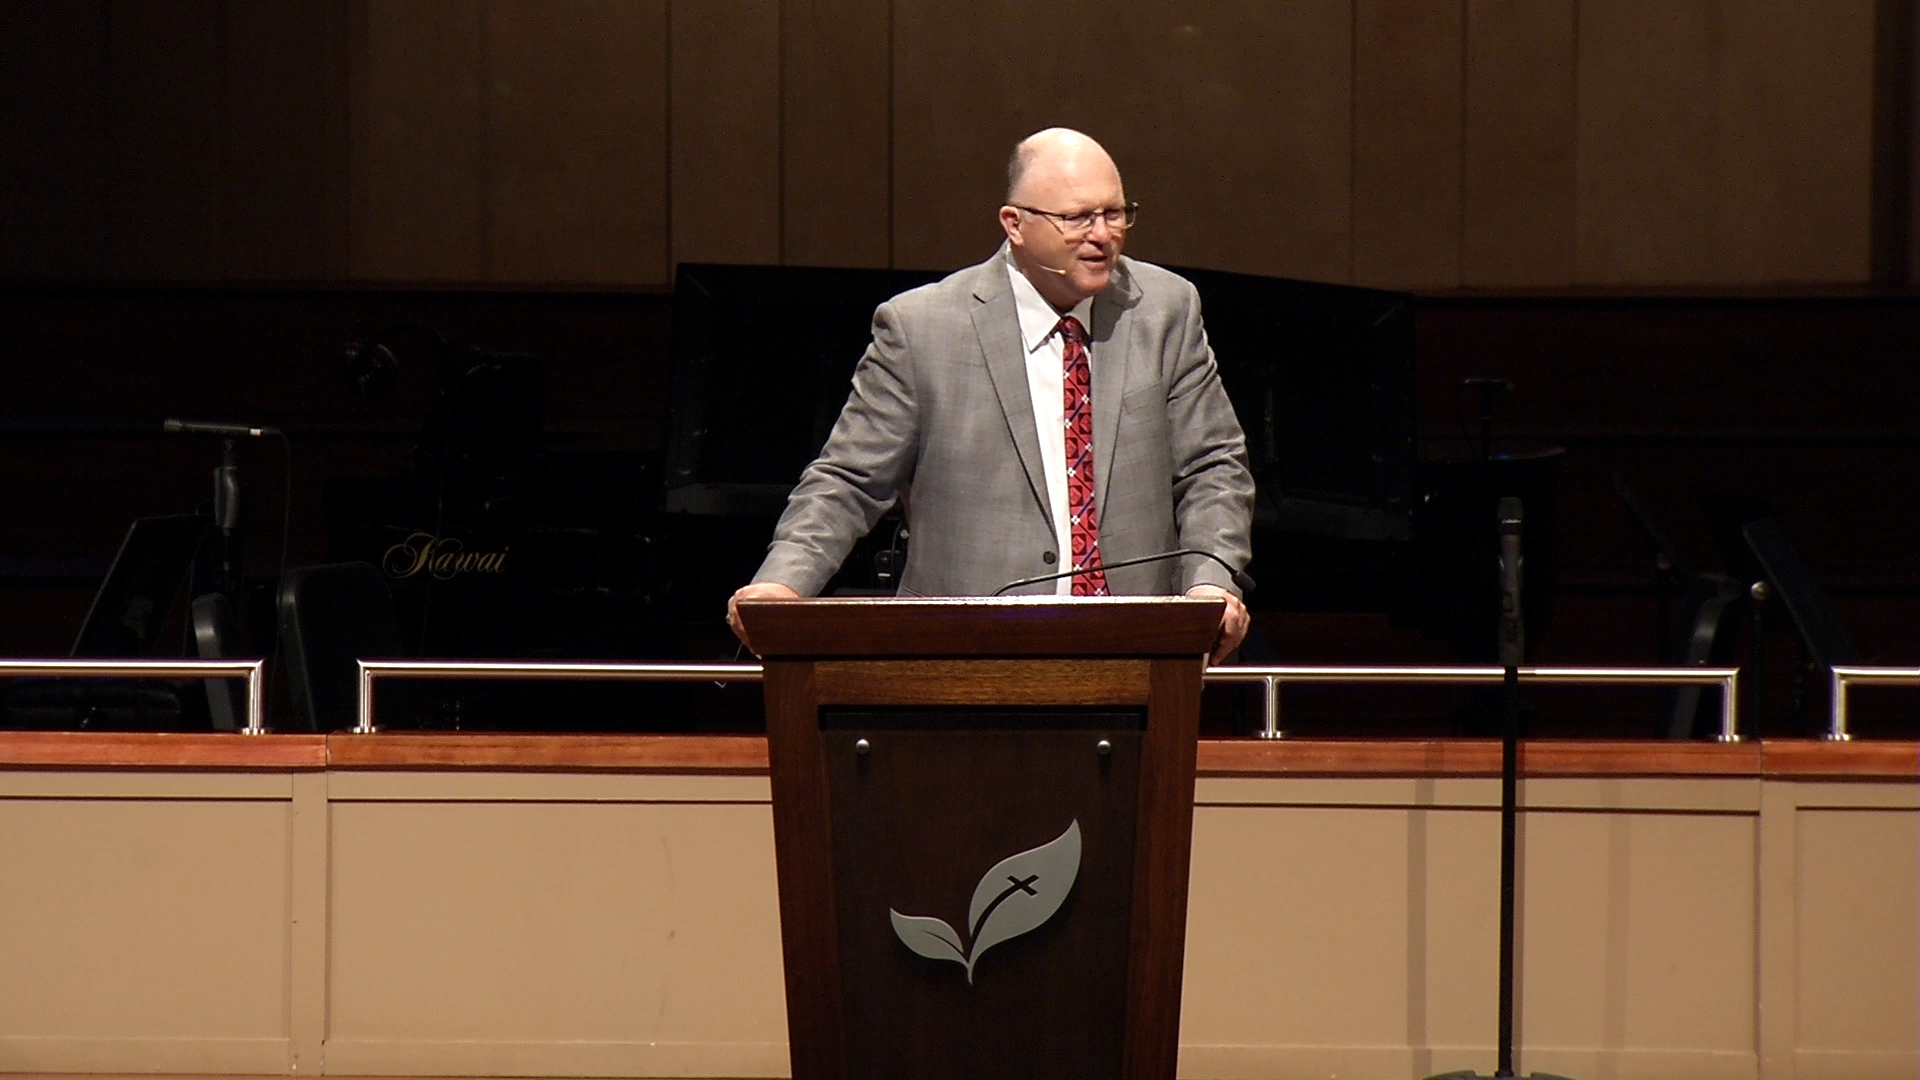 Pastor Paul Chappell: A Prepared Heart